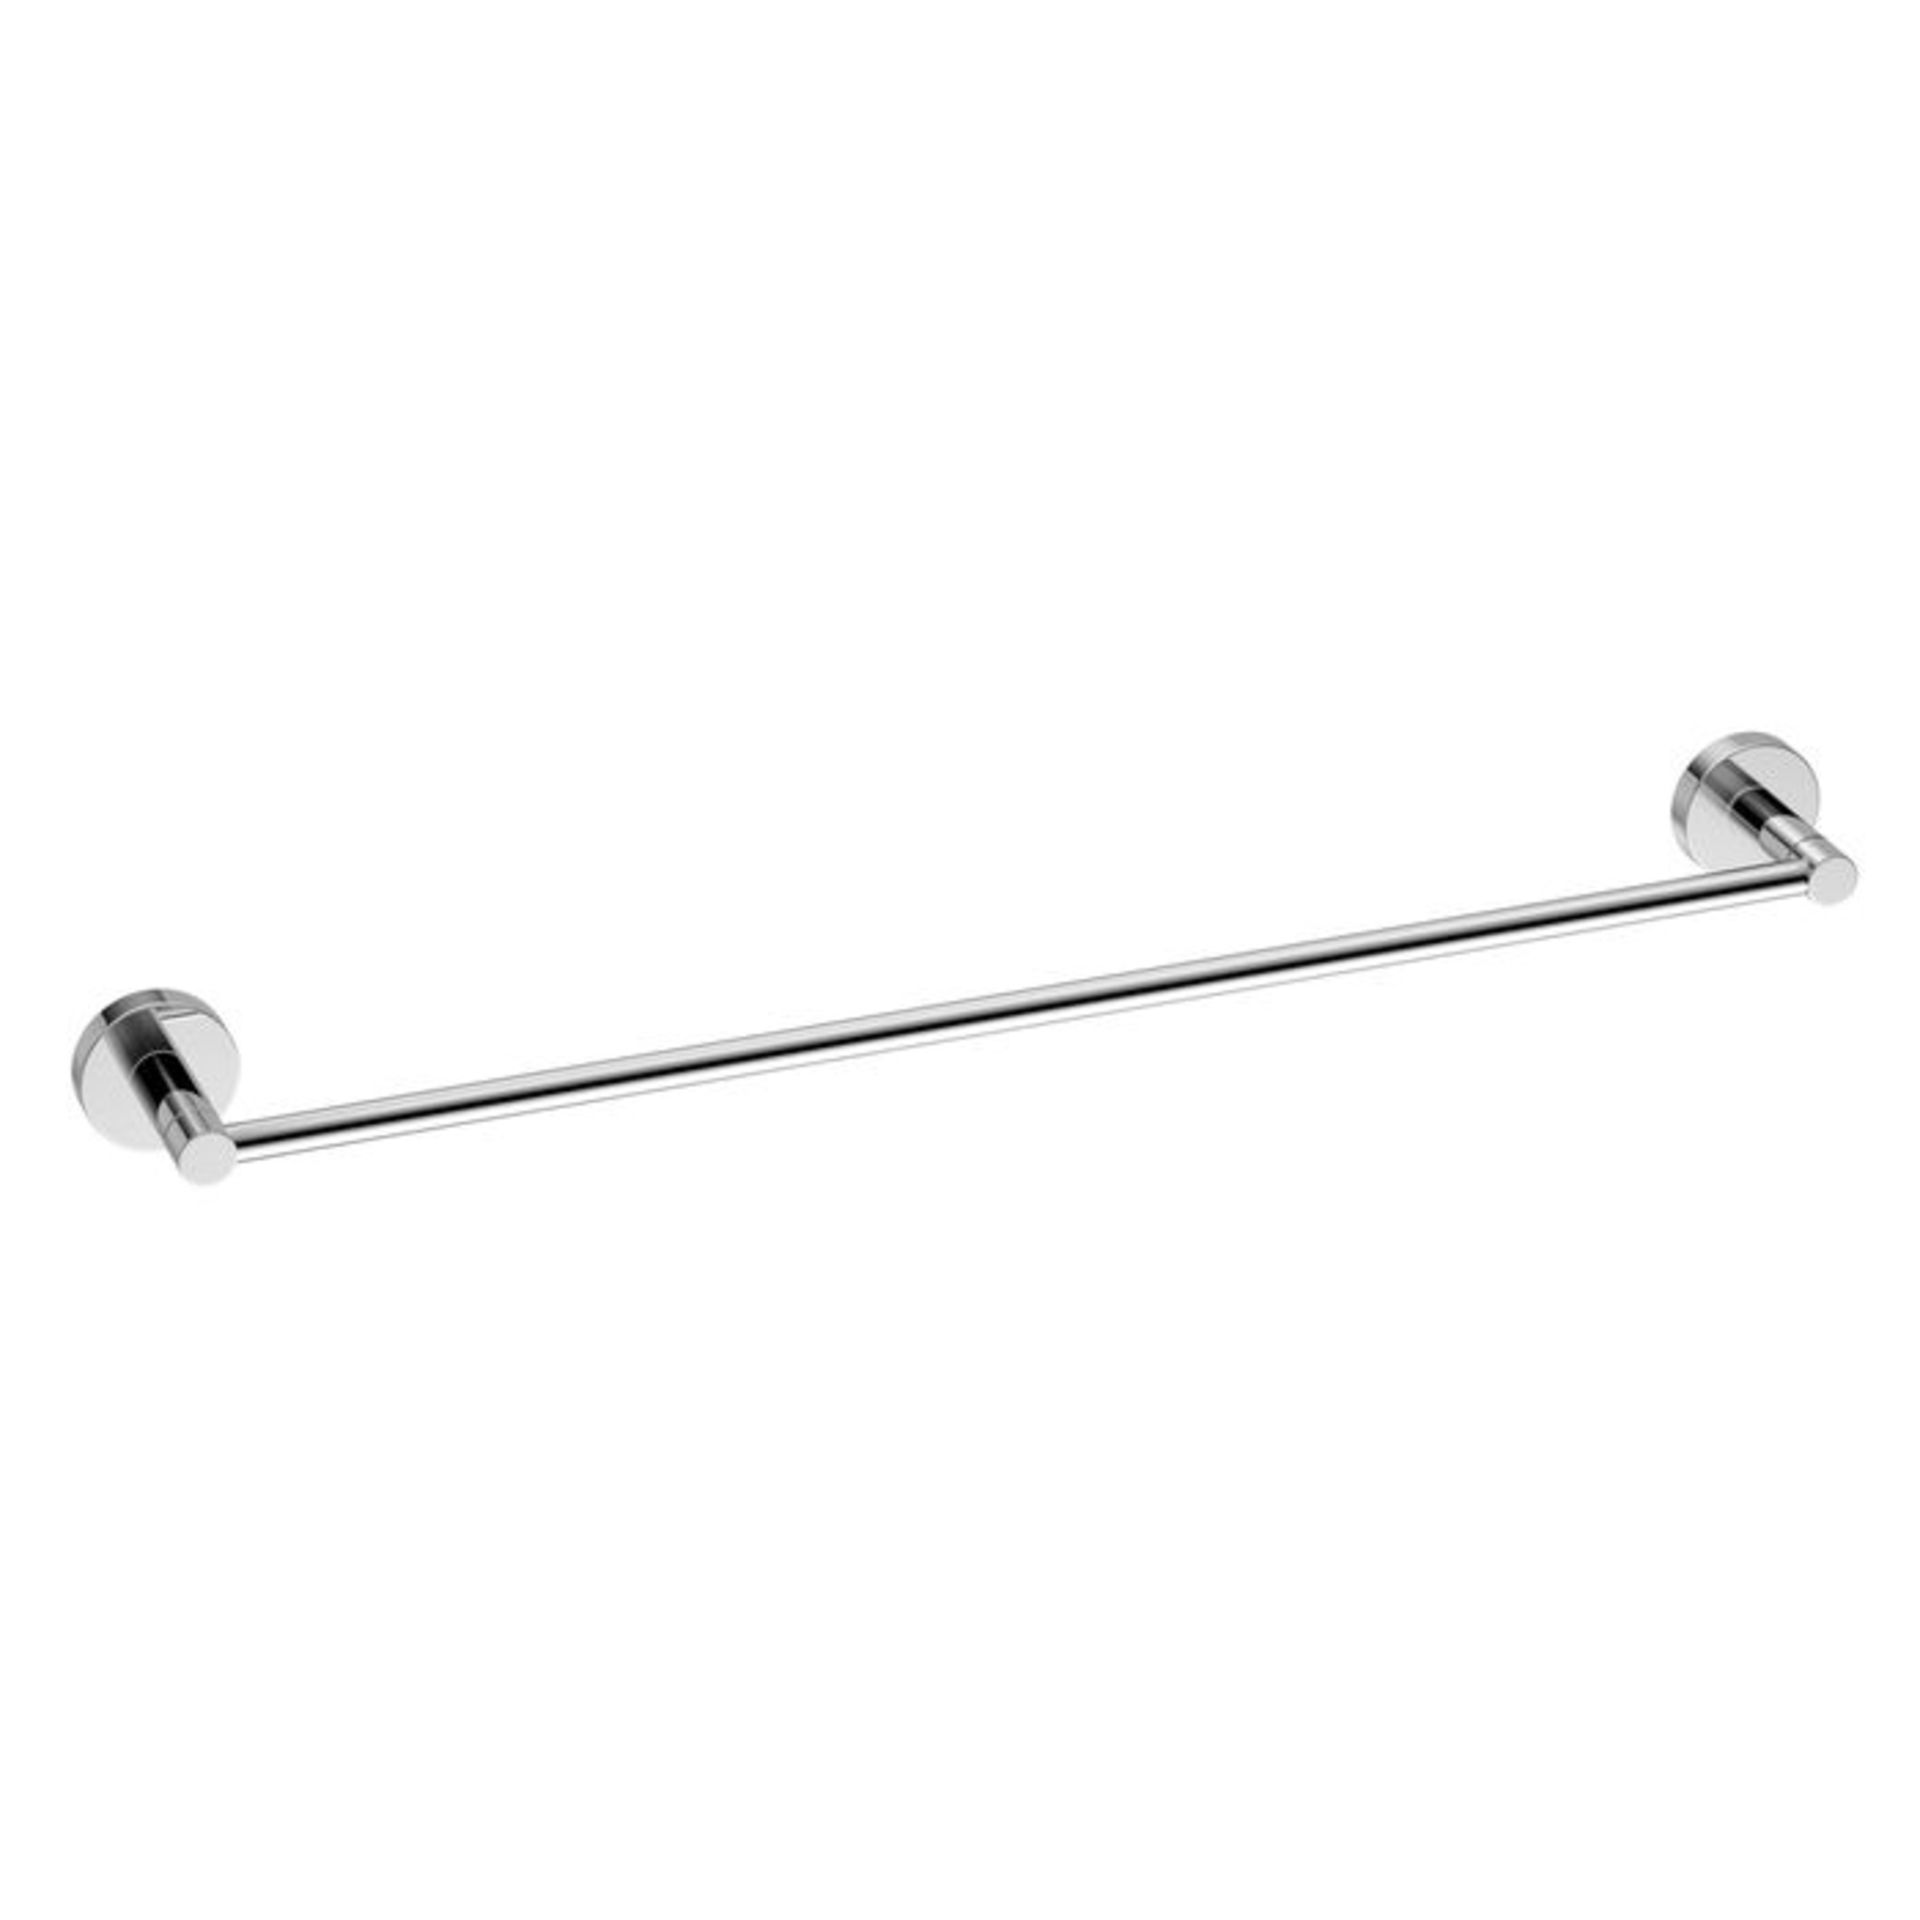 (TT168) Finsbury Towel Rail. Completes your bathroom with a little extra functionality and styl...